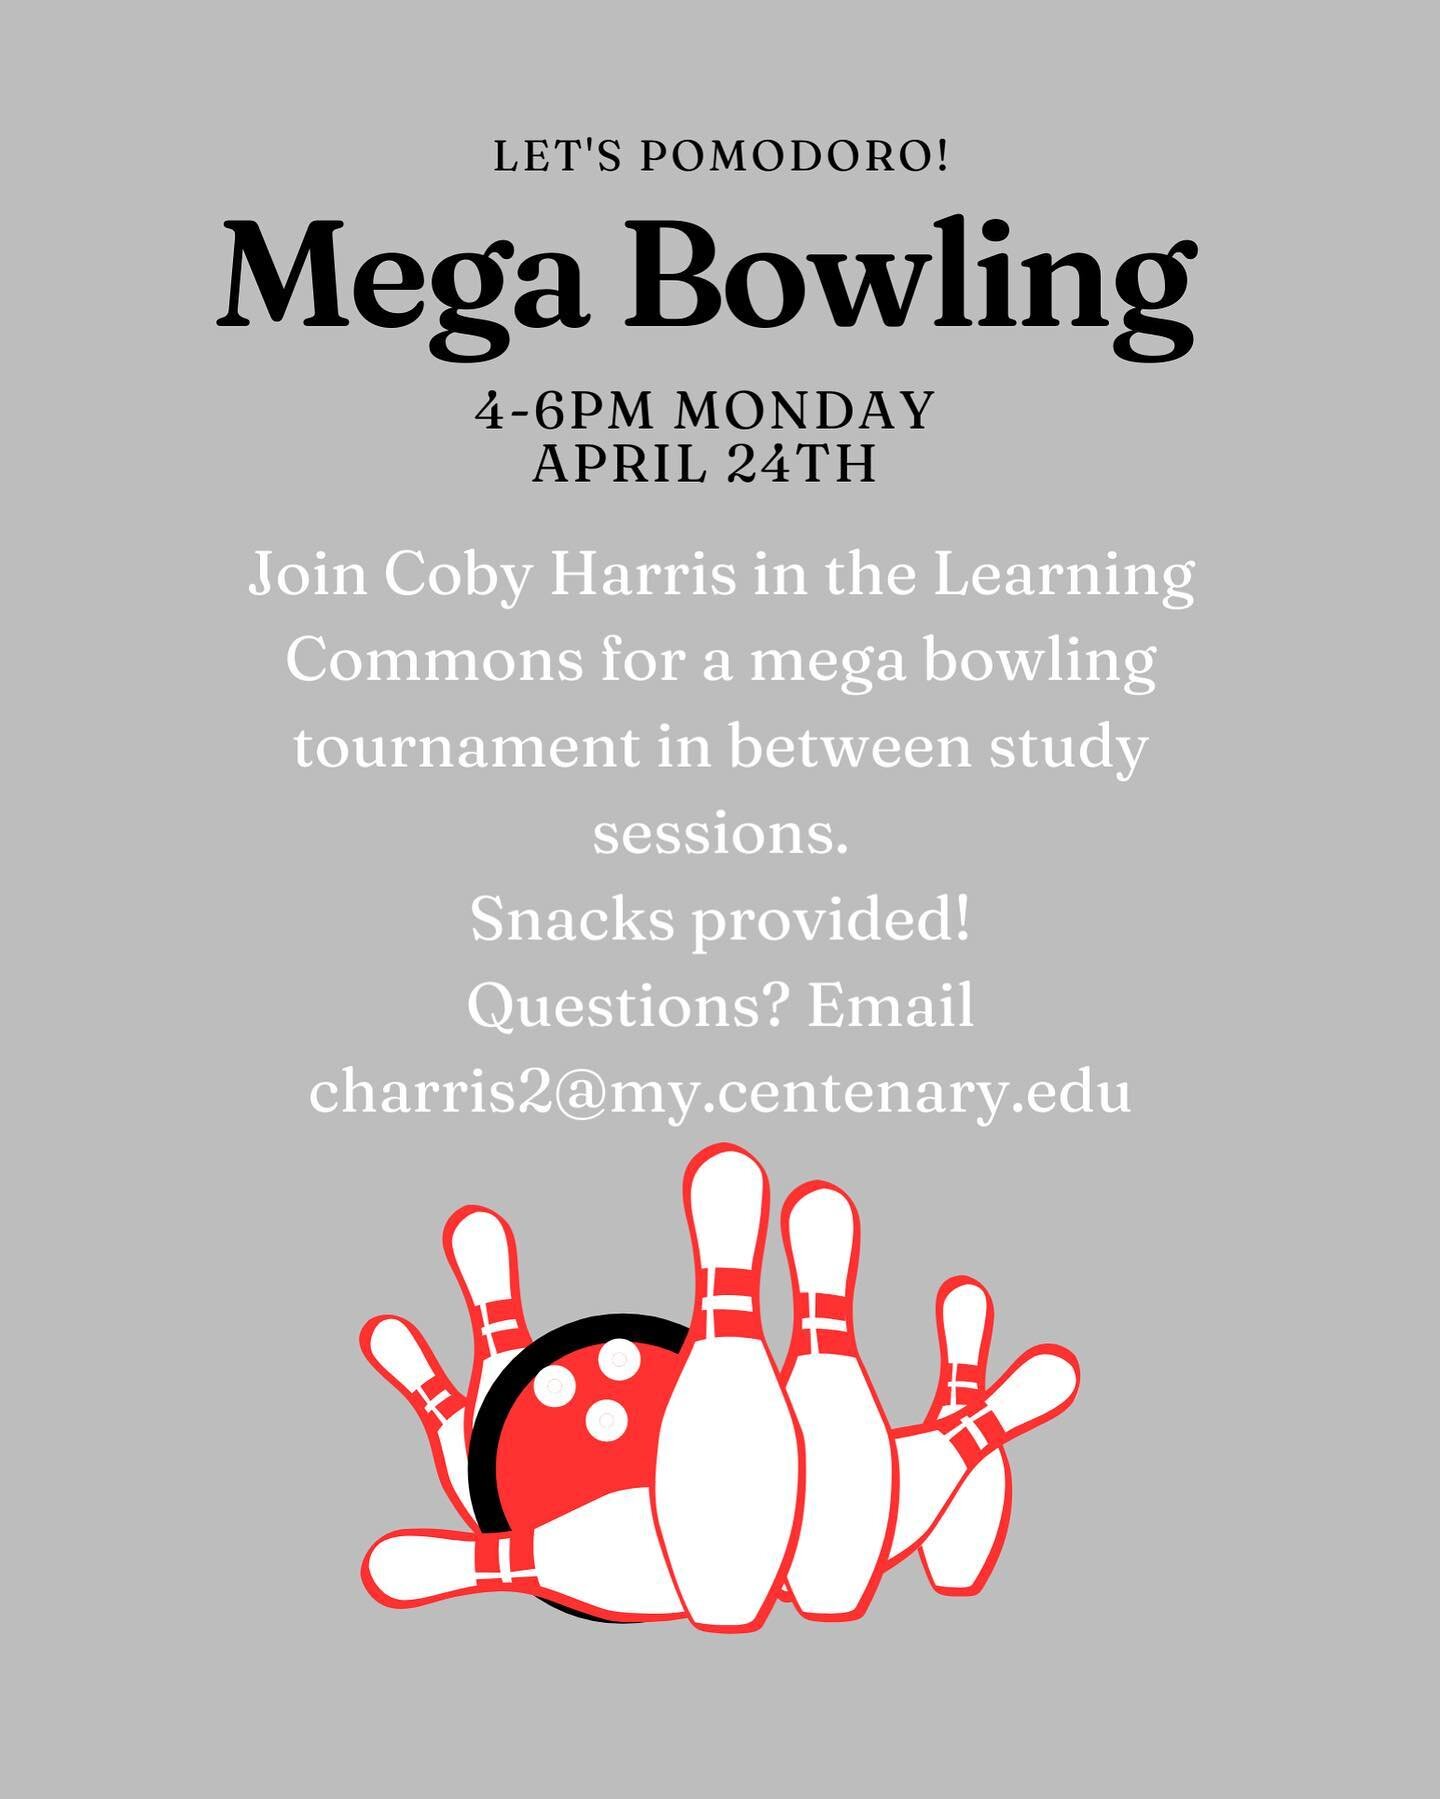 Come join Coby tomorrow for an active Pomodoro session! Bowl in the stacks during breaks for a chance to win prizes! 🎳